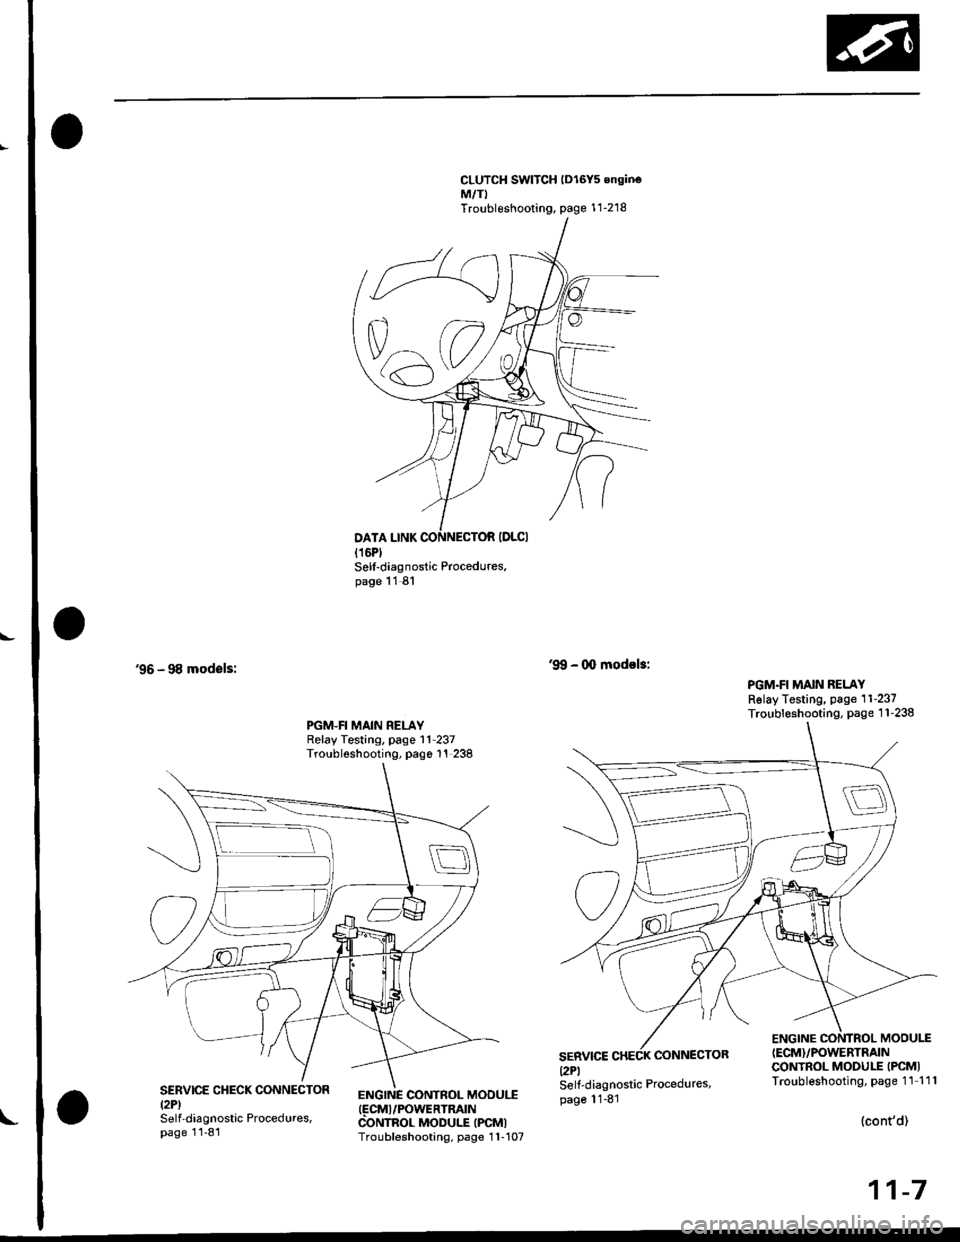 HONDA CIVIC 1997 6.G Workshop Manual I
CLUTCH SWITCH lDl6Y5 onginoM,/TITroubleshooting, page 1 1-218
96 - 98 modsls:
Sell-diagnostic Procedures.page 11 81
ENGINC CONTROL MOOUI.T(FCMI/POWERTRATN
CONTROL MODULE IPCMITroubleshooting, page 